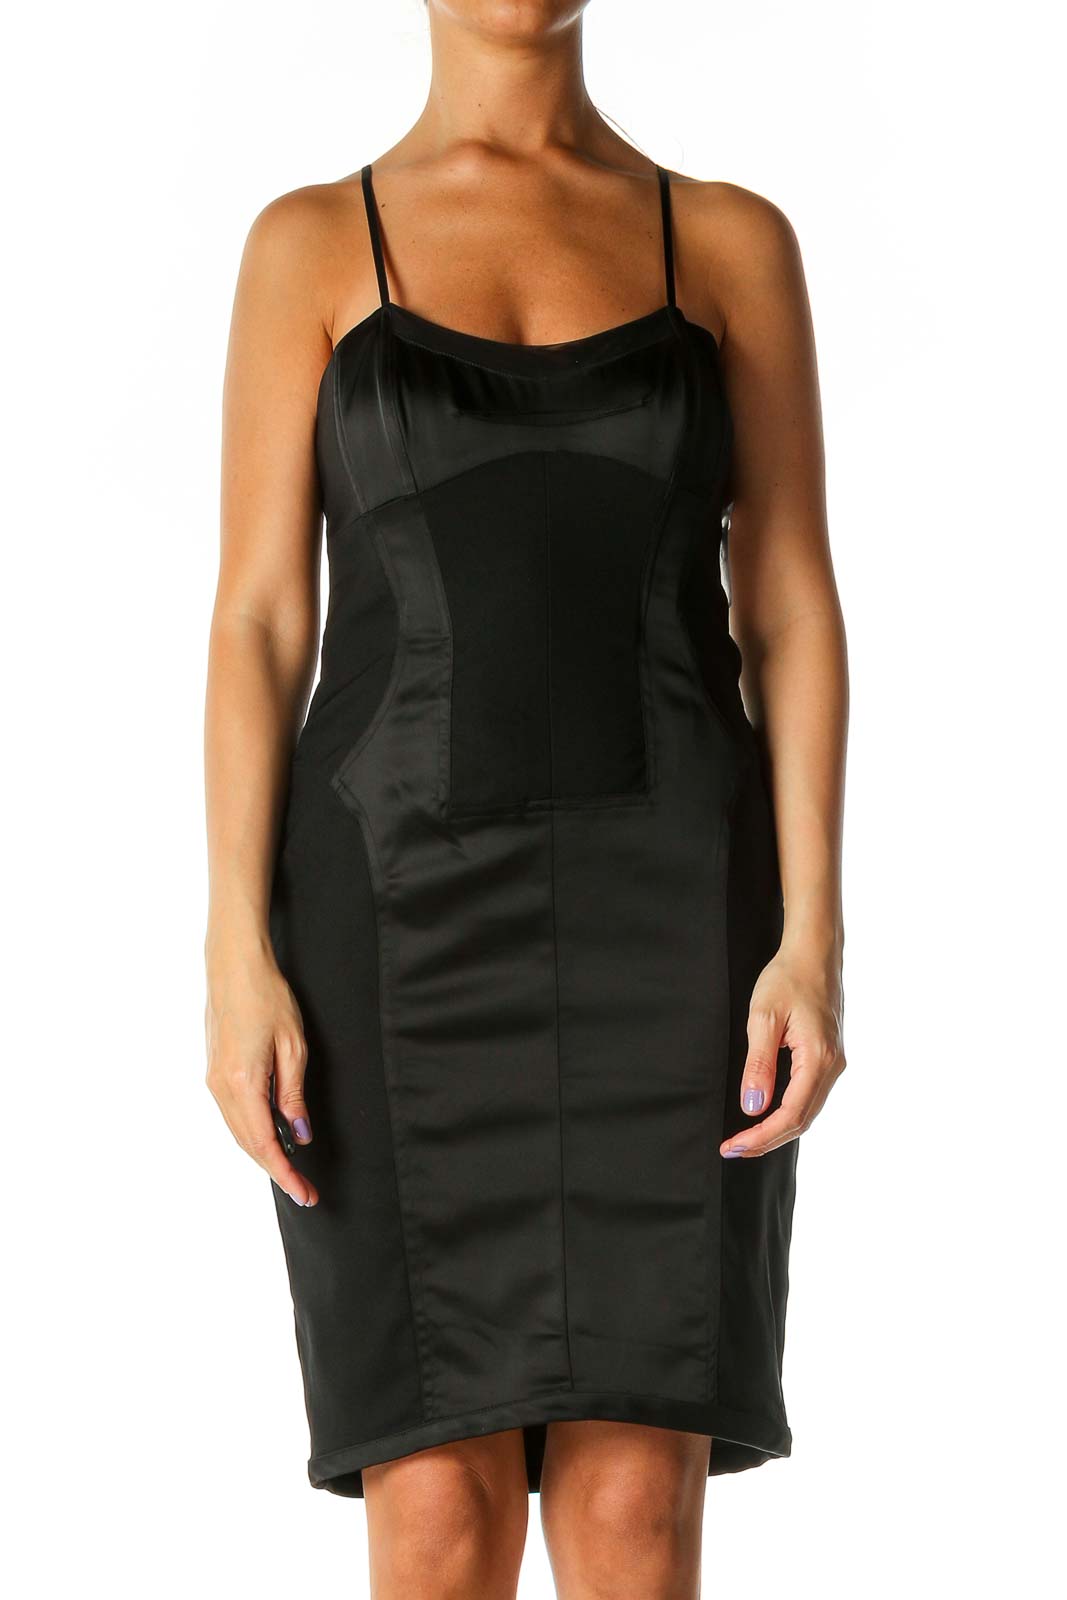 Black Solid Chic Sheath Dress Front